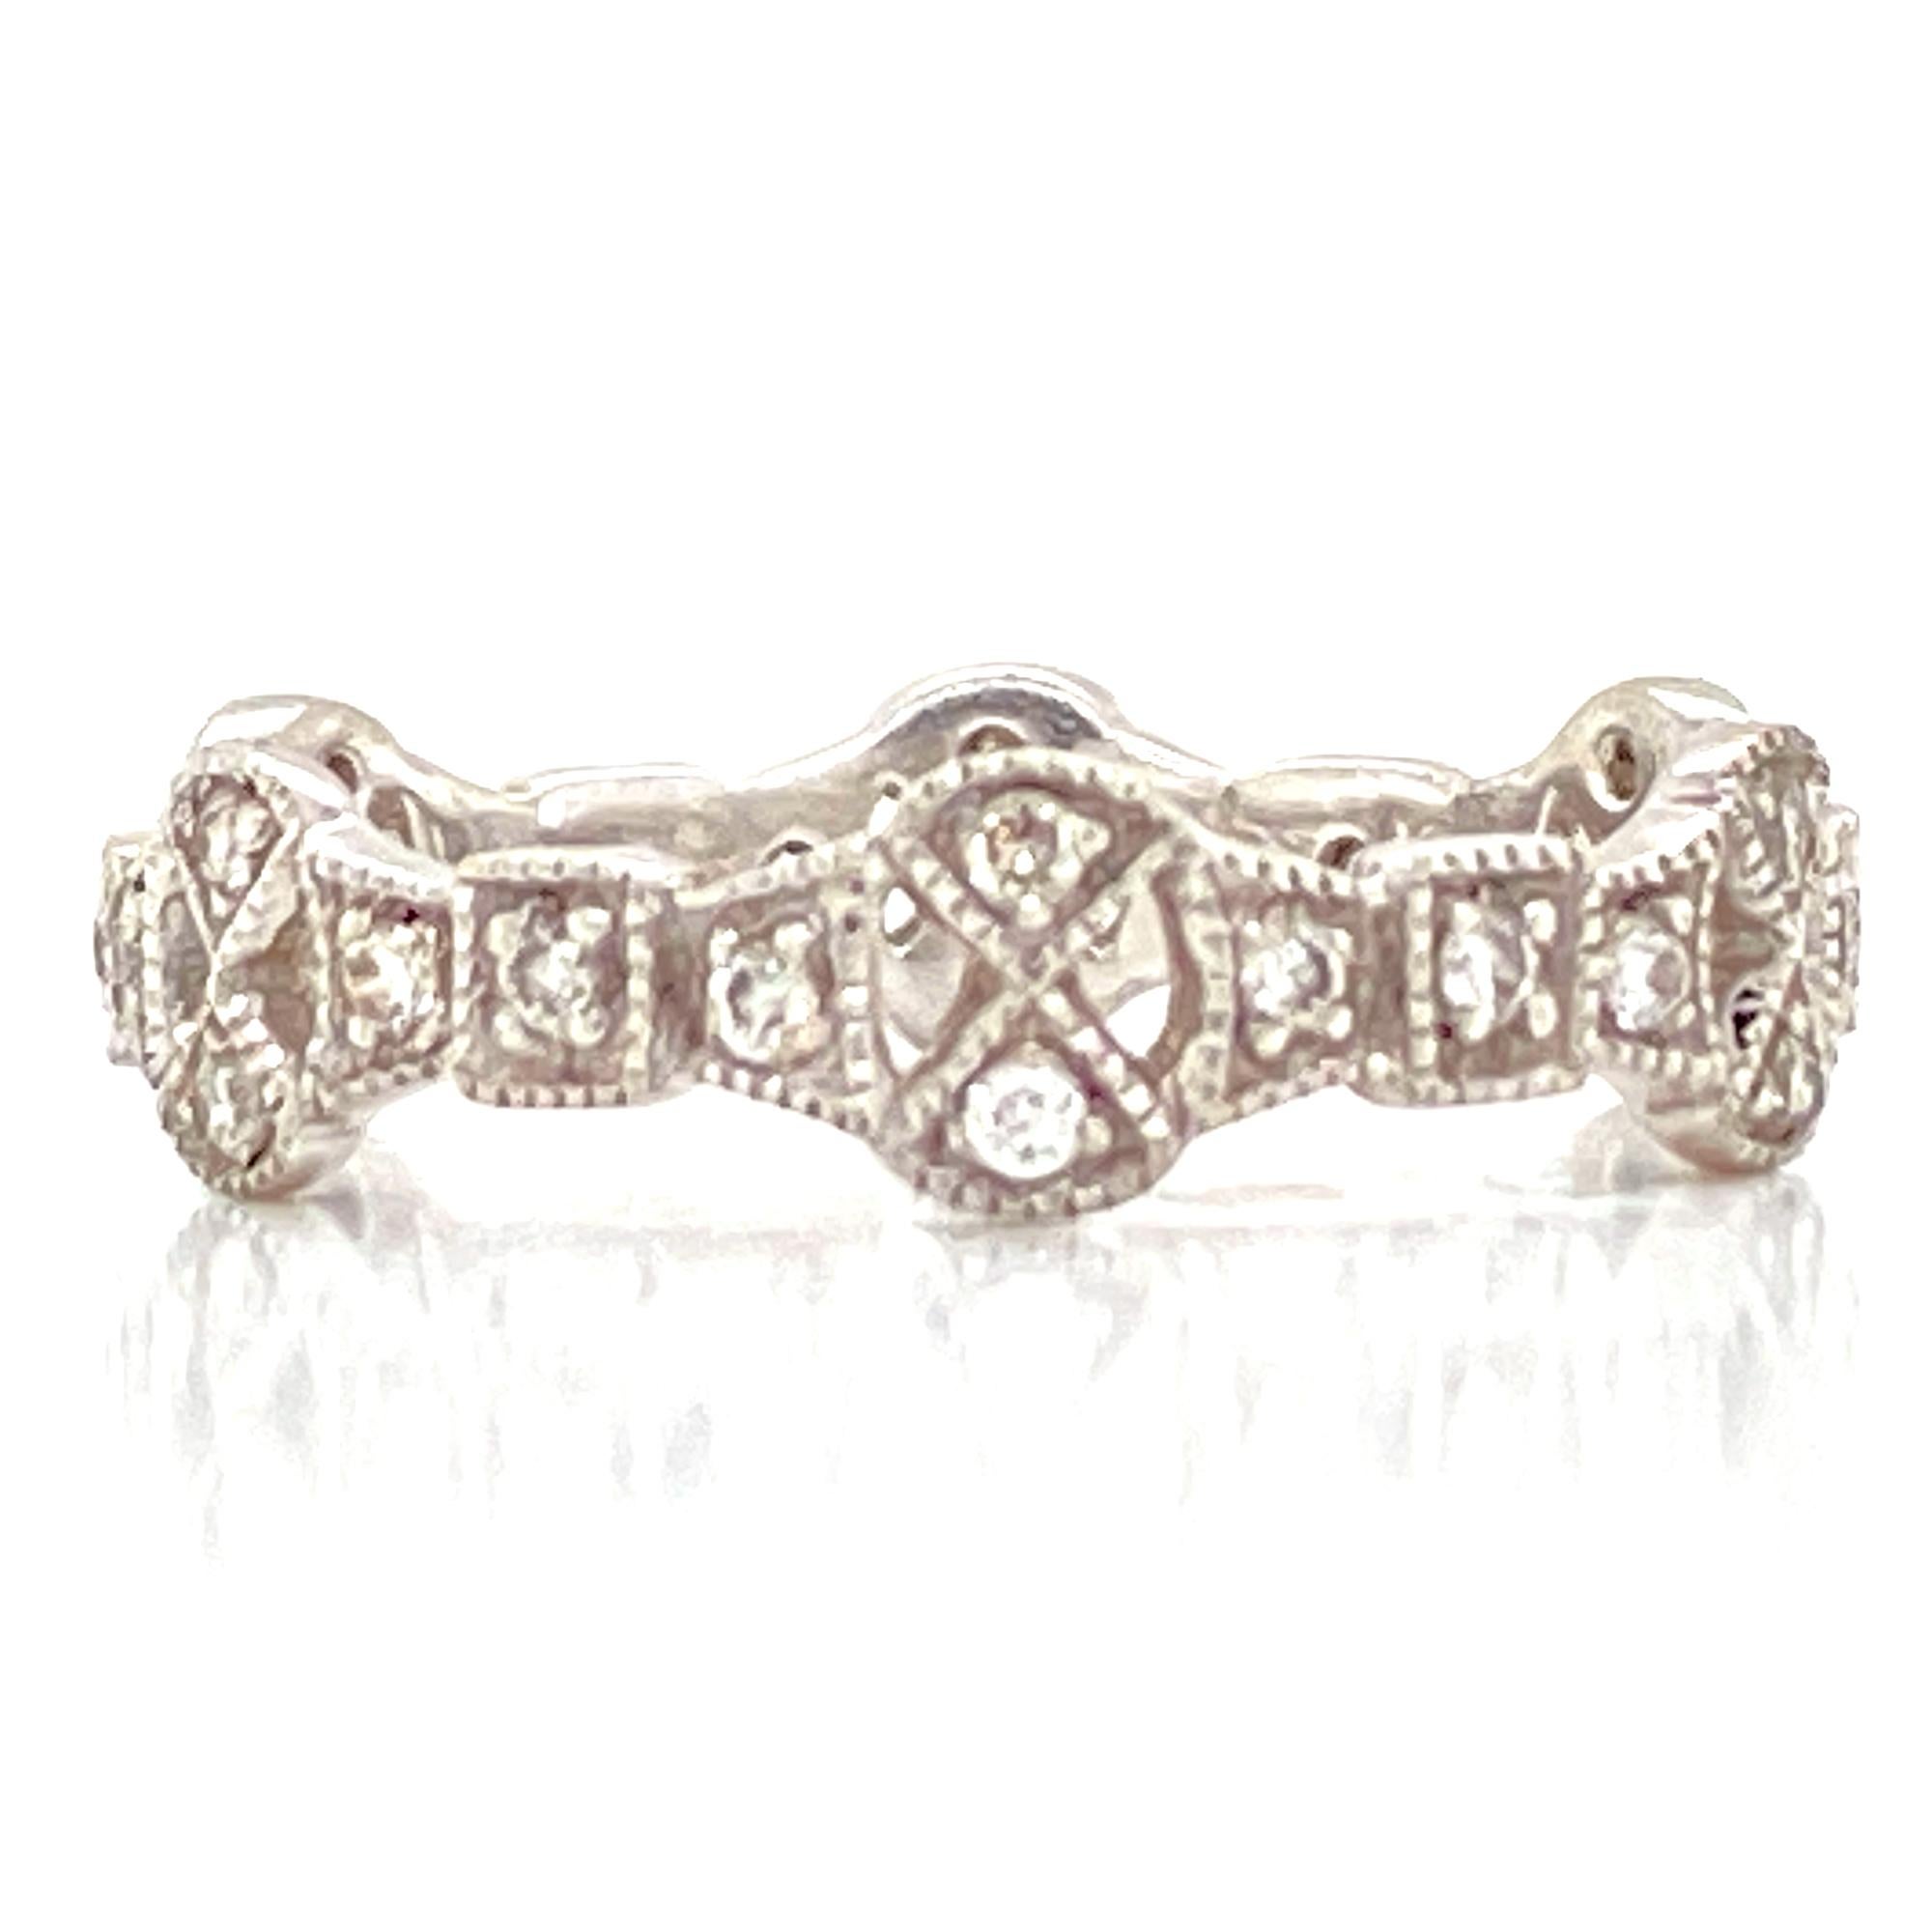 Diamond filigree Deco style eternity band crafted in platinum. The band features .30 carat total weight of round brilliant cut diamonds graded H-I color and SI clarity.  The band is size 7 and measures approximately 5mm in width. 